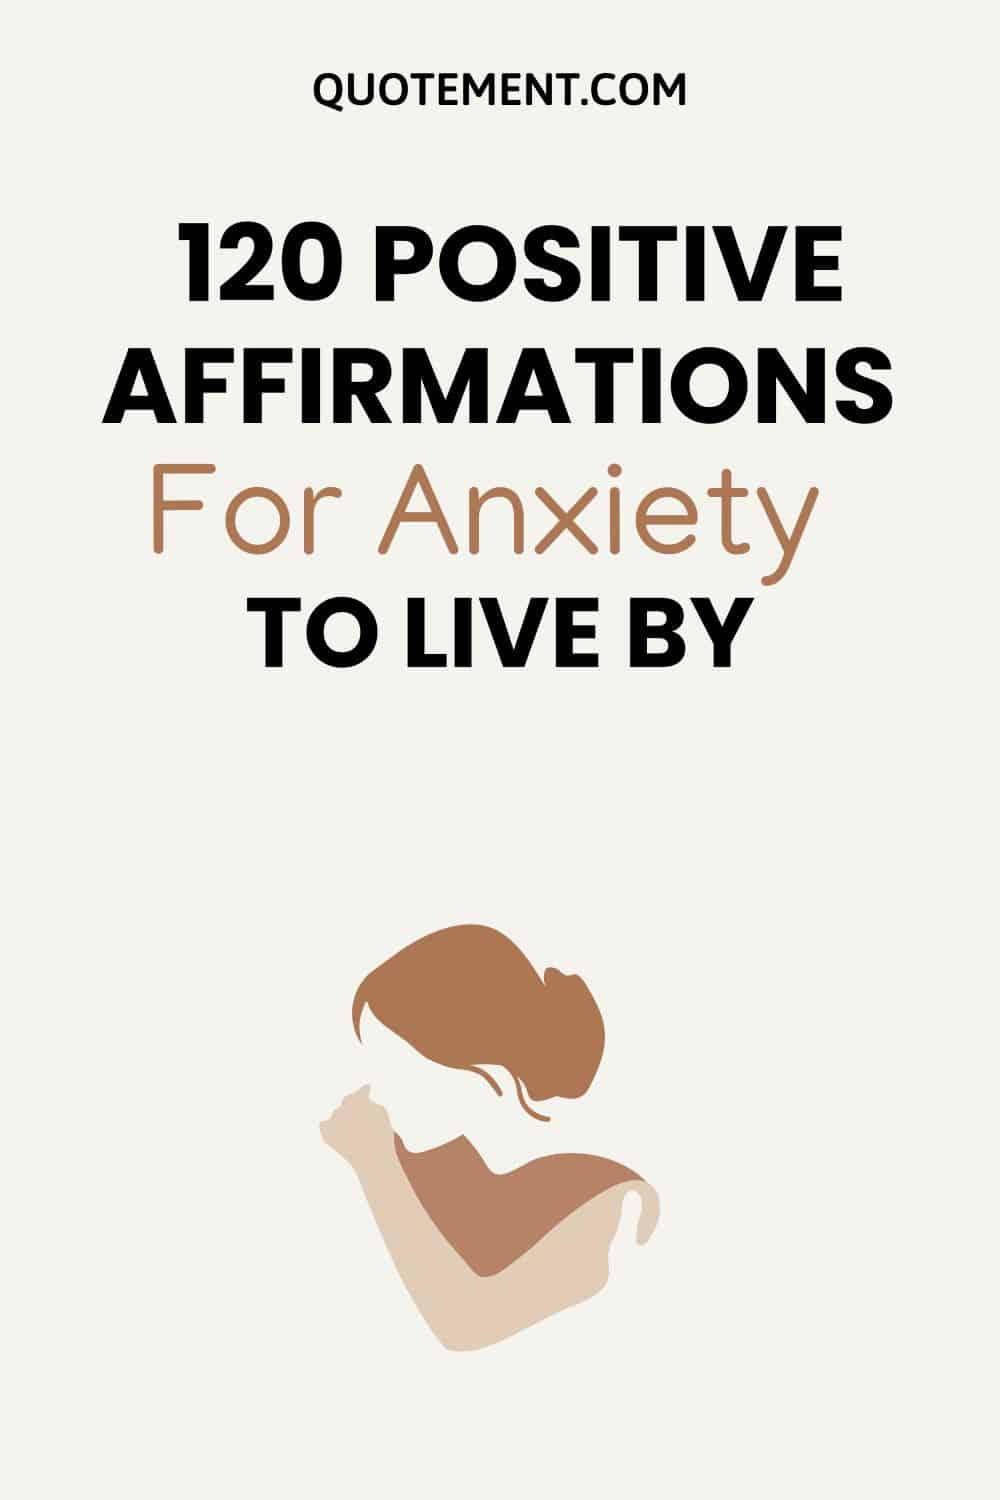 120 Positive Affirmations For Anxiety To Set You Free